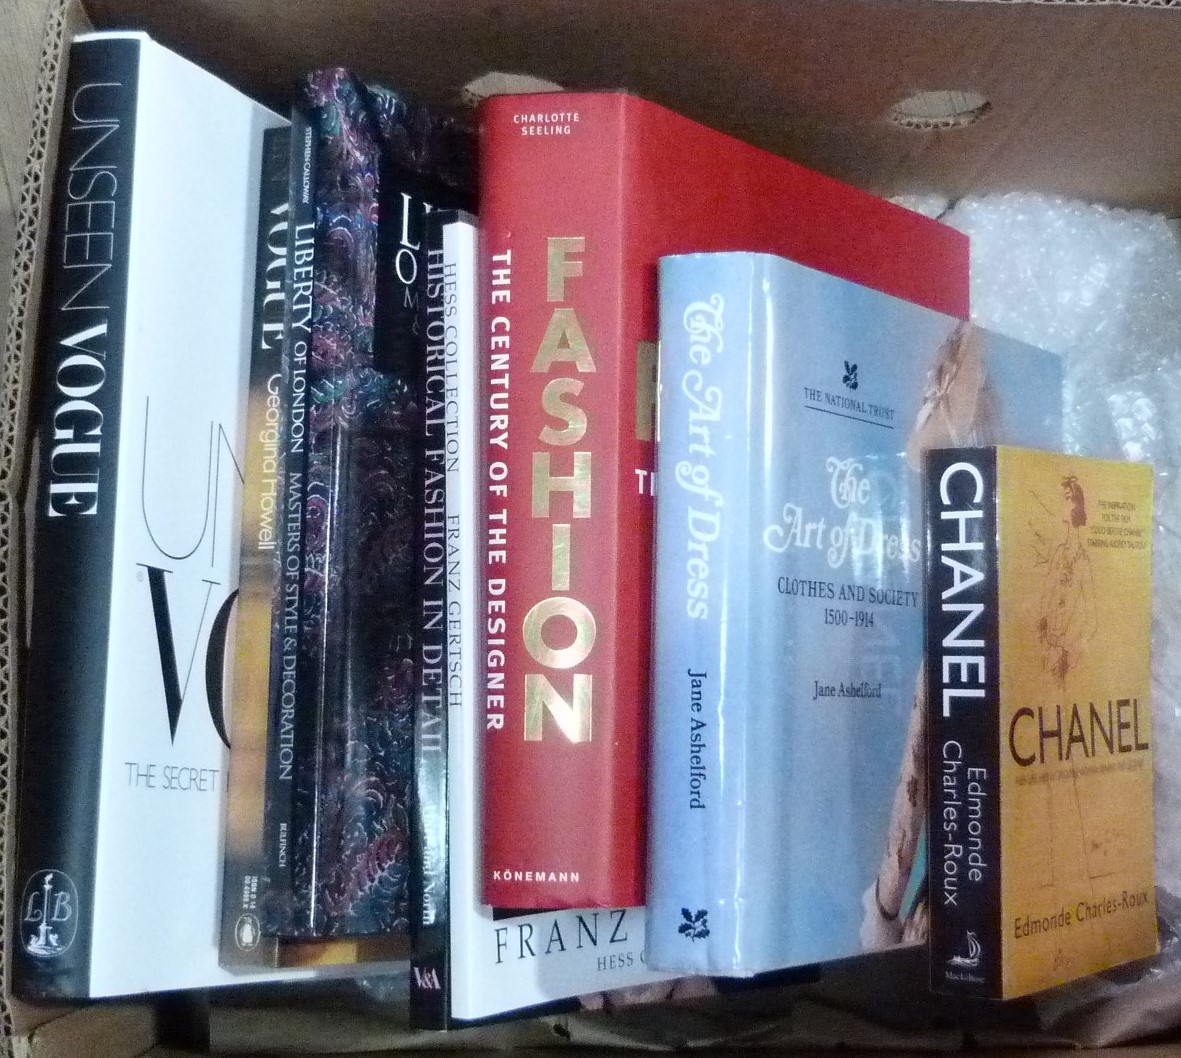 A quantity of books on fashion, including Vogue, The Art of Dress, Chanel etc